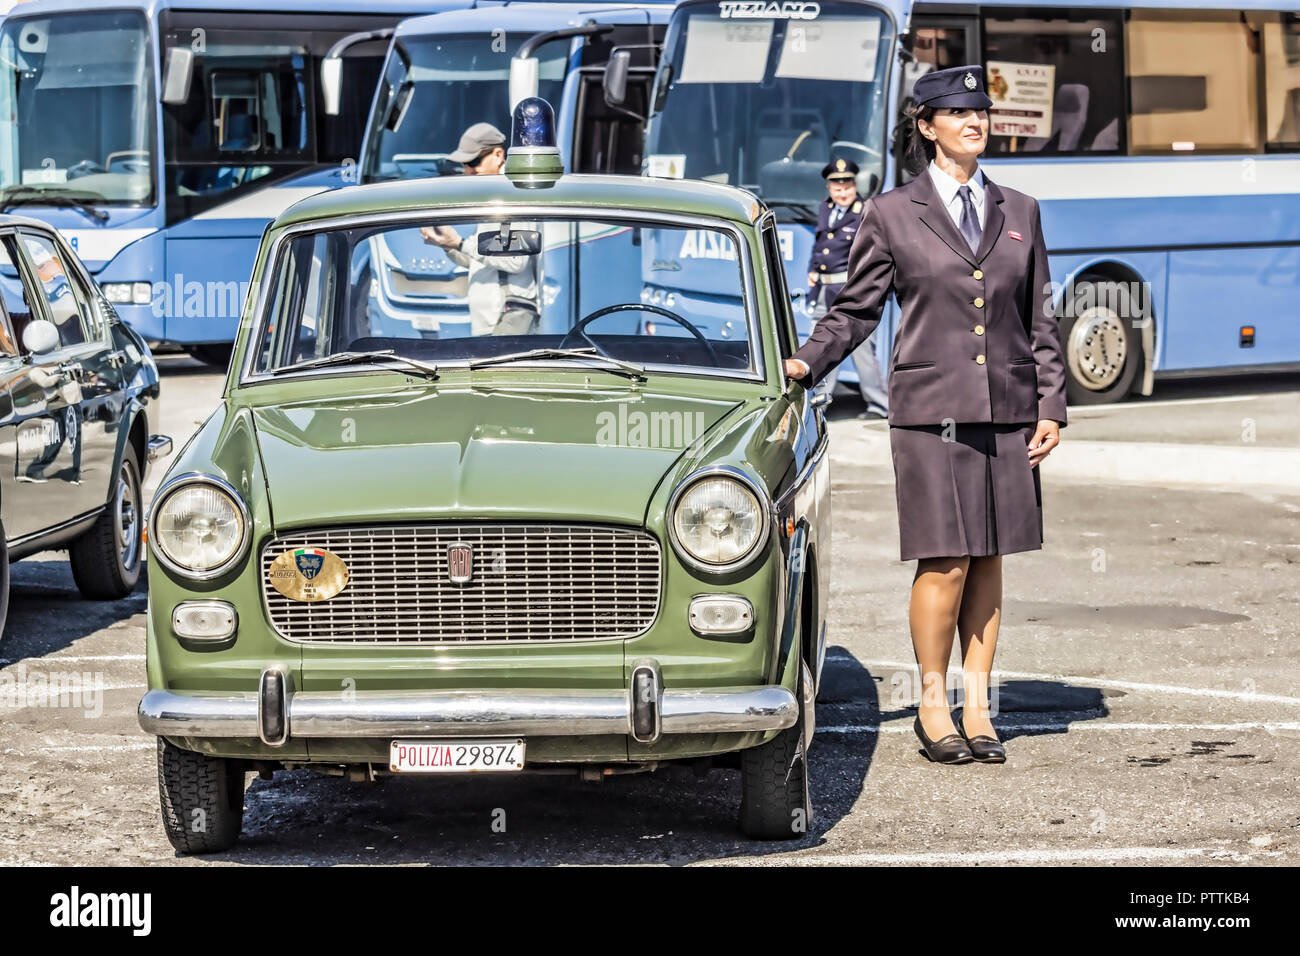 Ostia Lido, Roma. Italy 09/30/2018. Vintage Police Woman posing with old Police car, Fiat 1100 at the  50 anniversary Italian Police Association Stock Photo